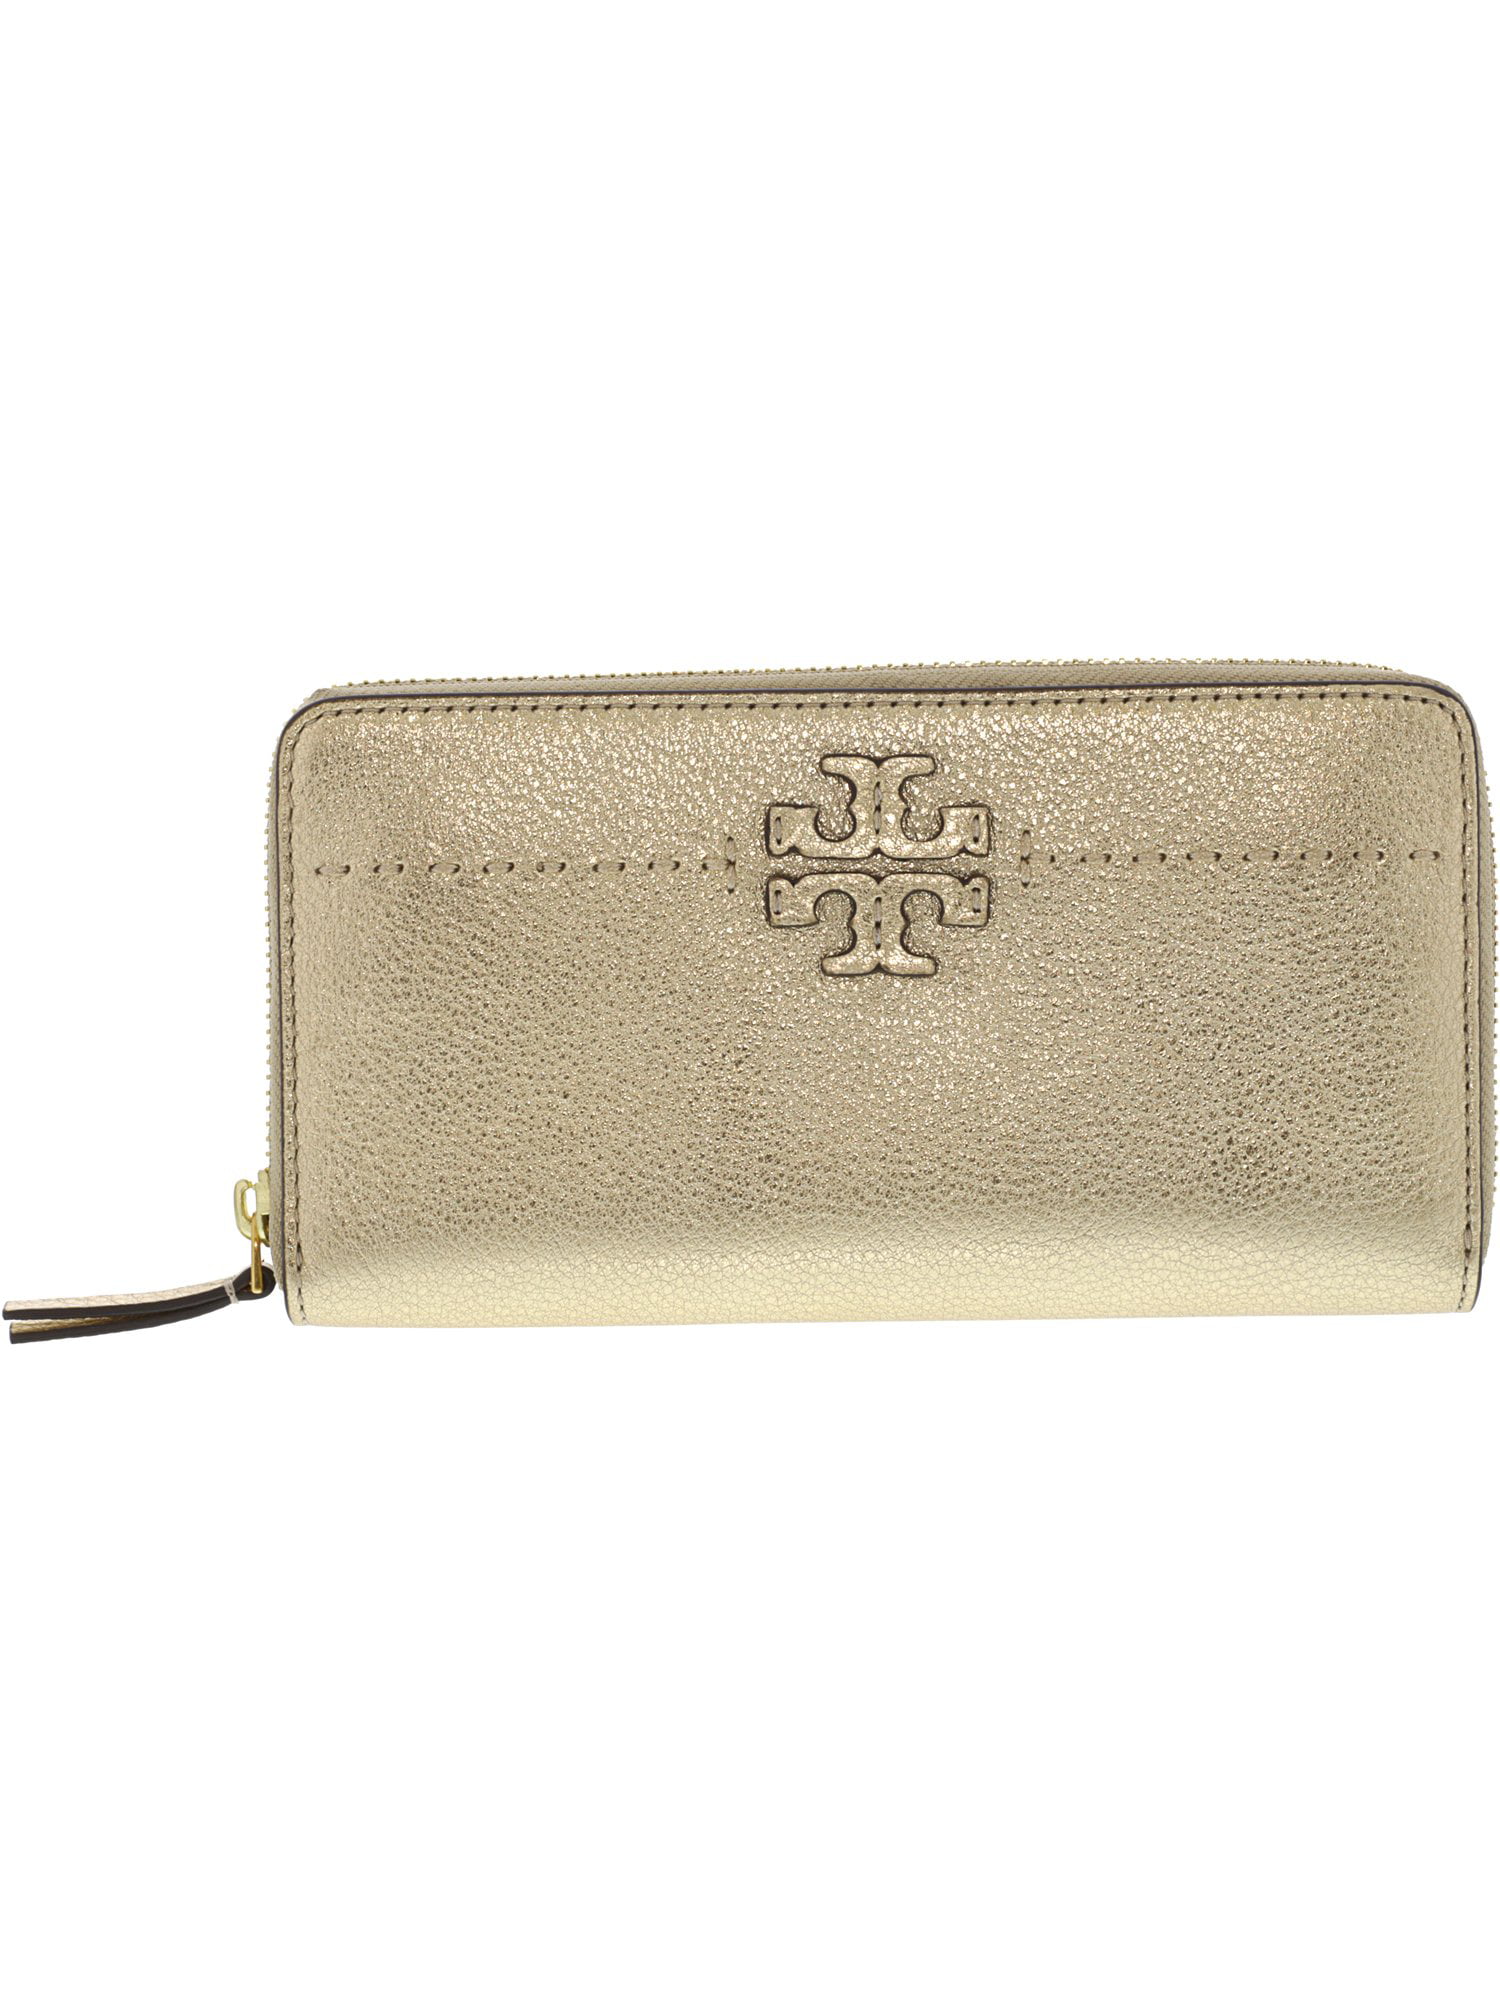 Tory Burch Women's Mcgraw Zip Continental Leather Wallet - Gold